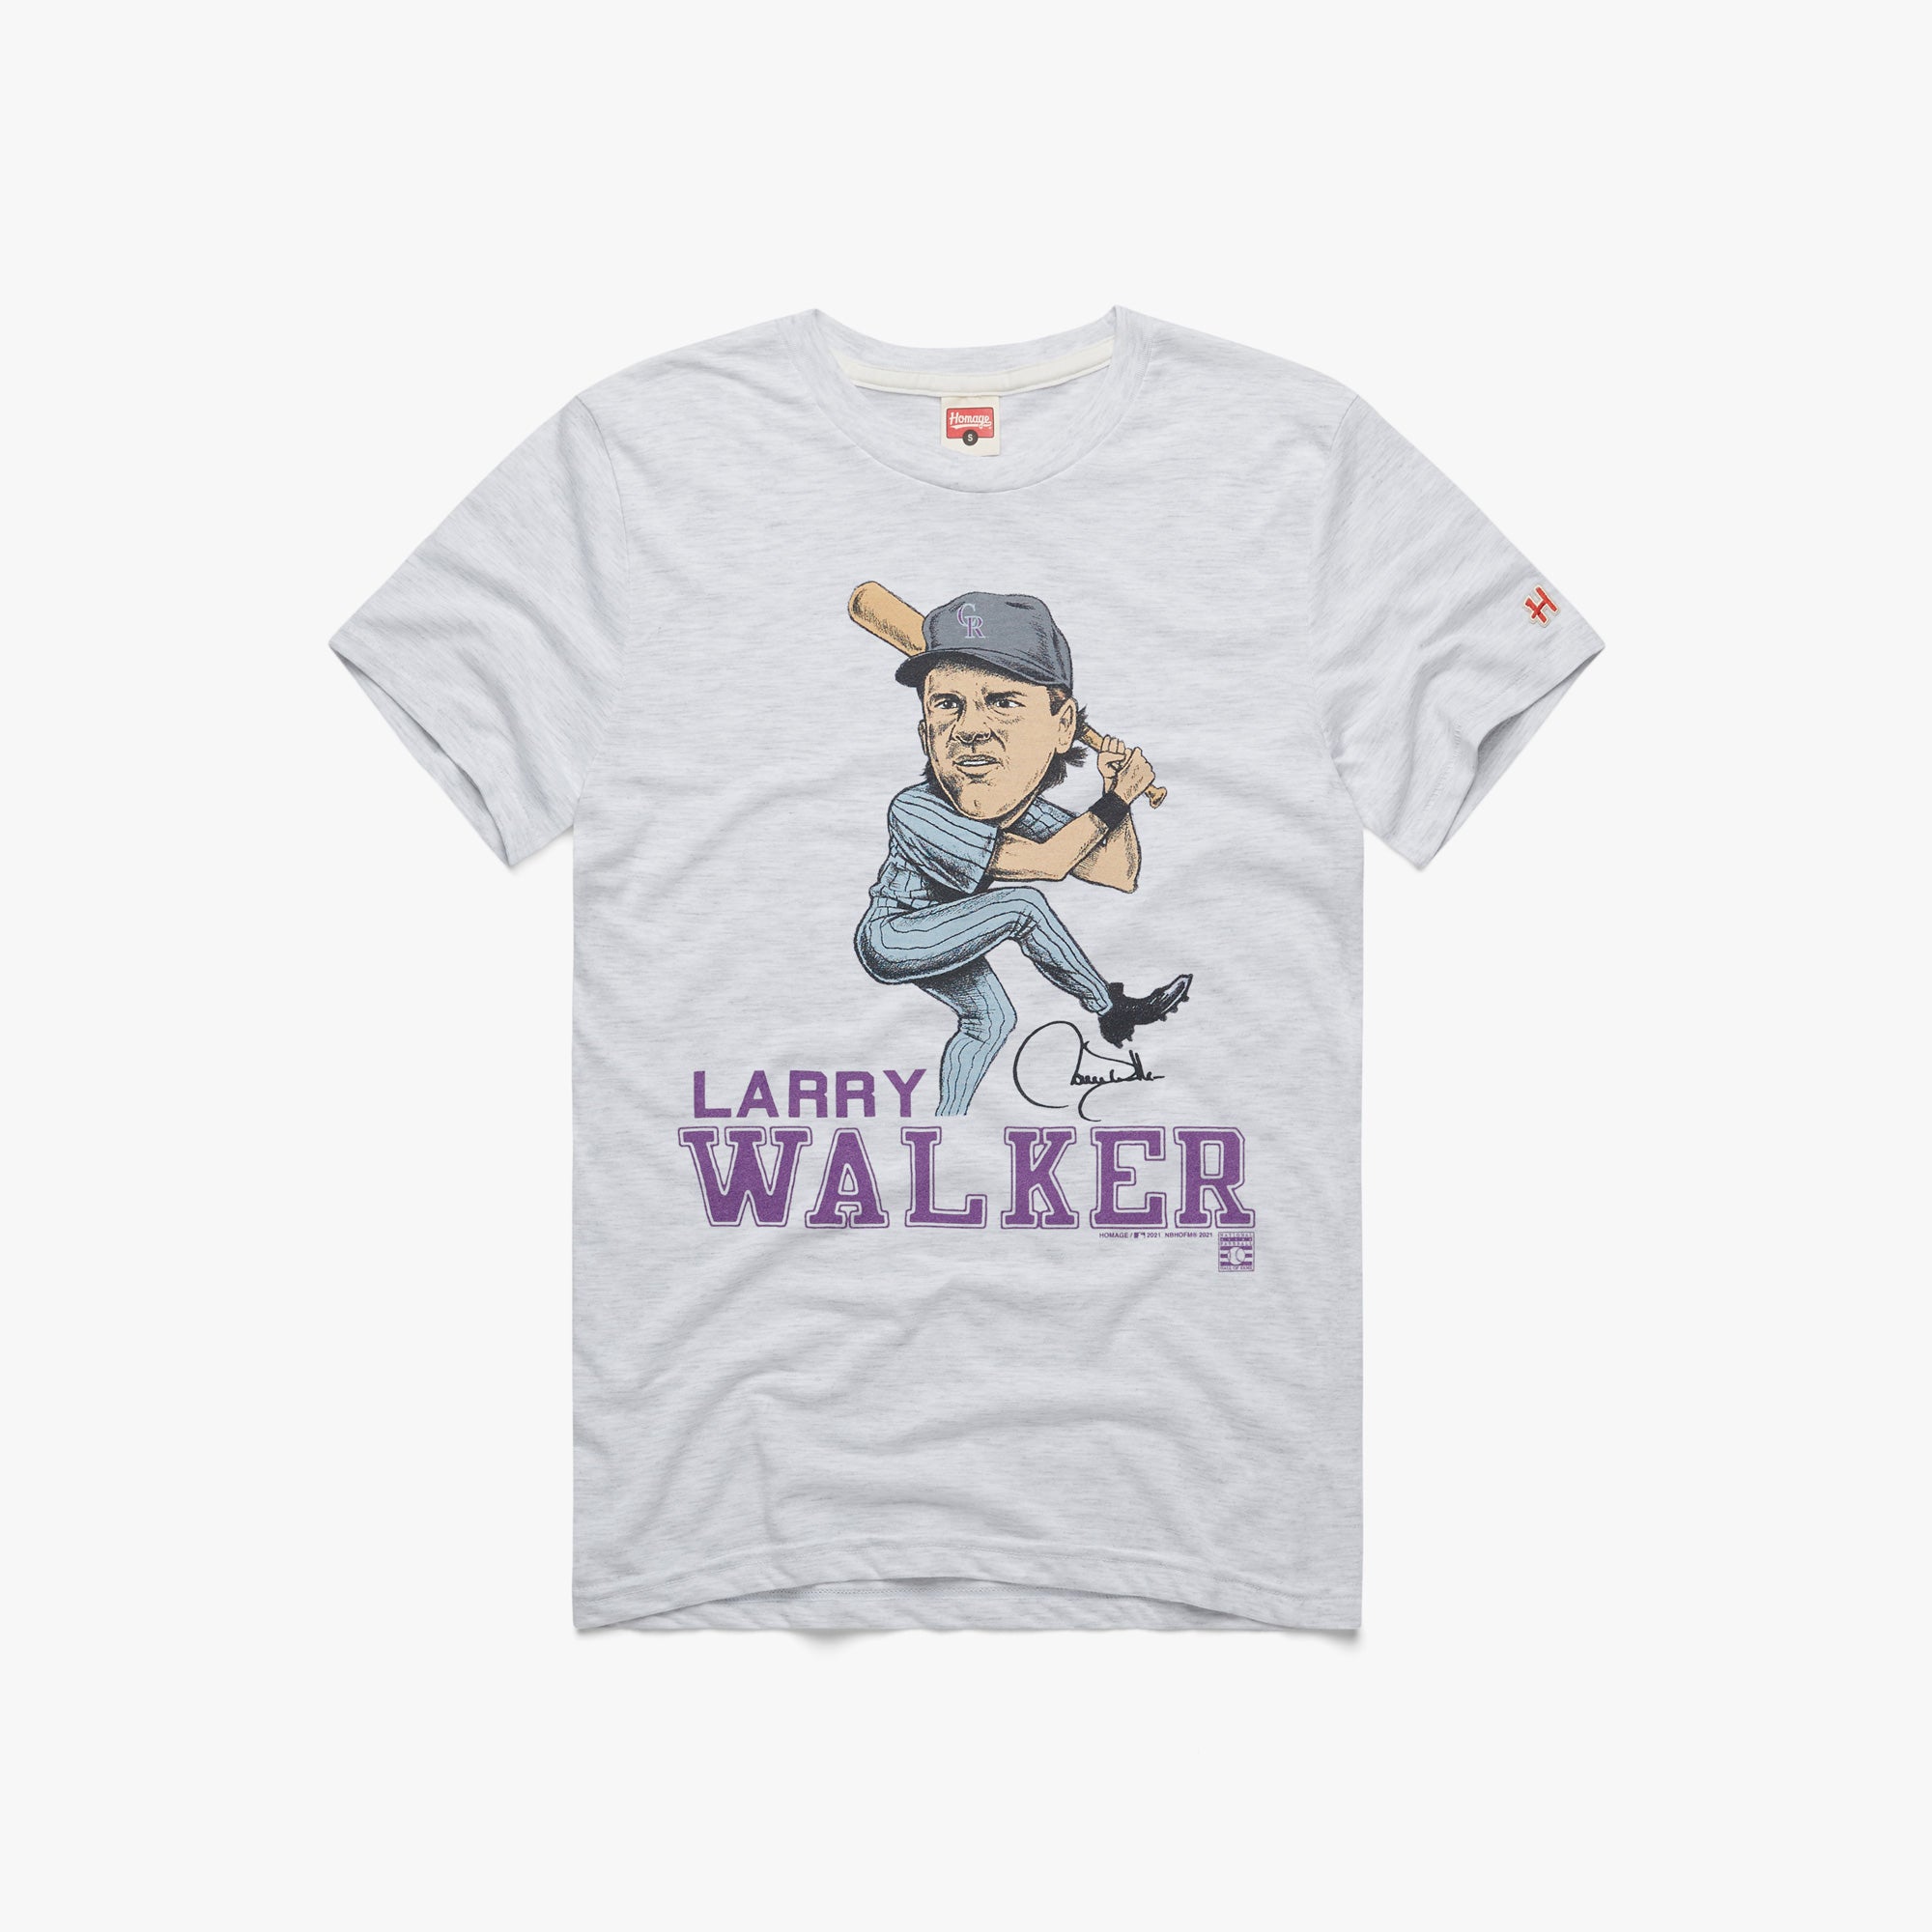 Rockies Larry Walker Signature T-Shirt from Homage. | Ash | Vintage Apparel from Homage.